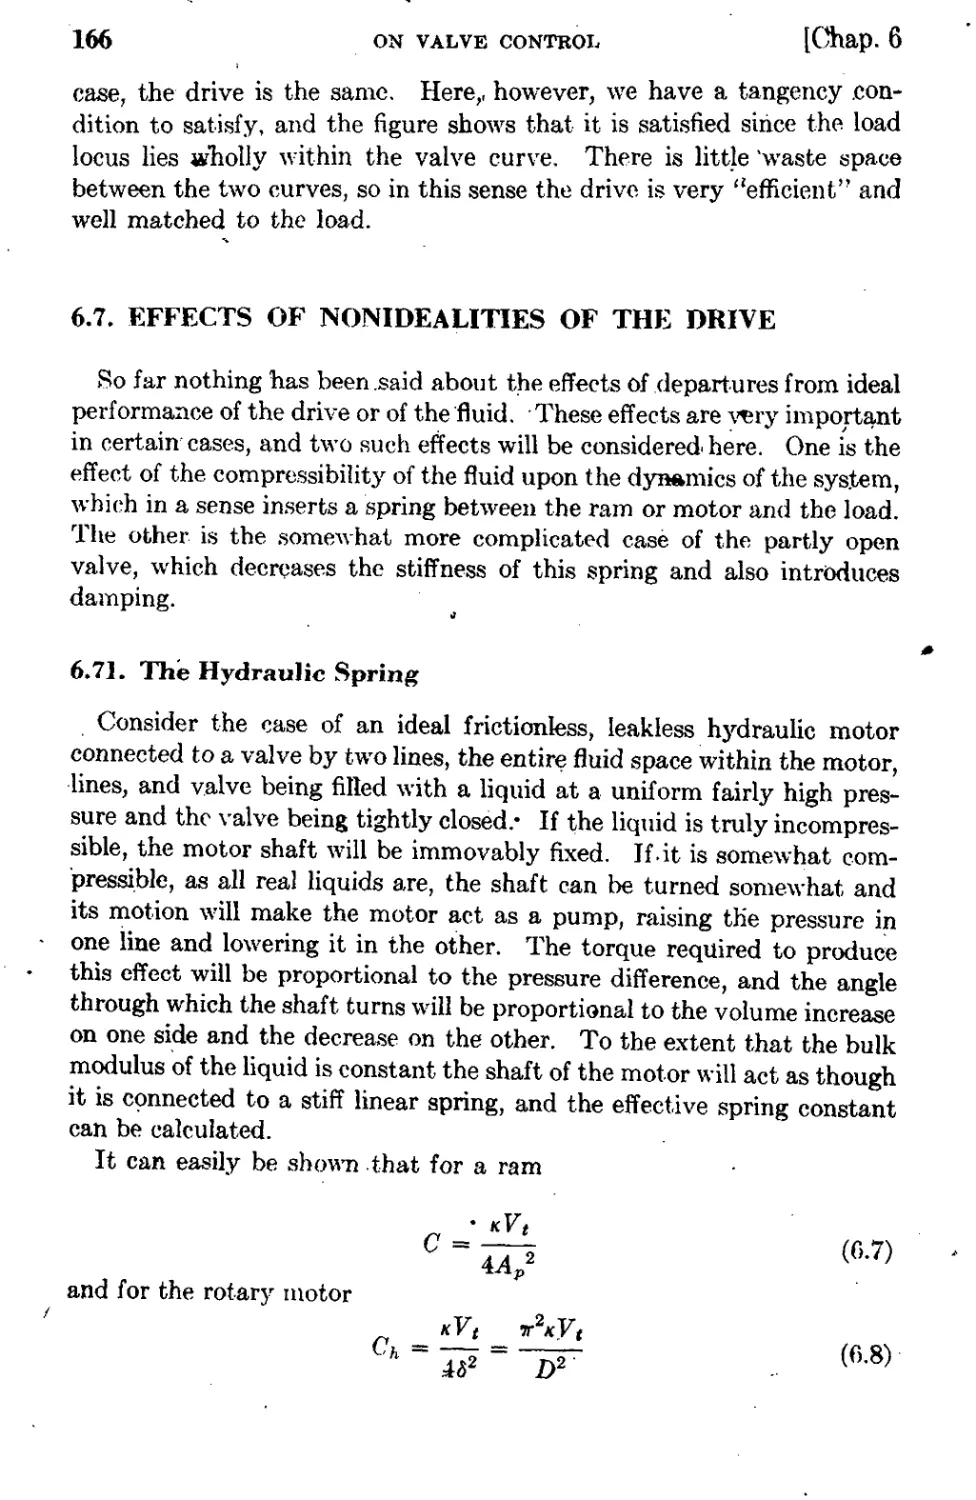 6.7 Effects of NomdeaUties of the Drive